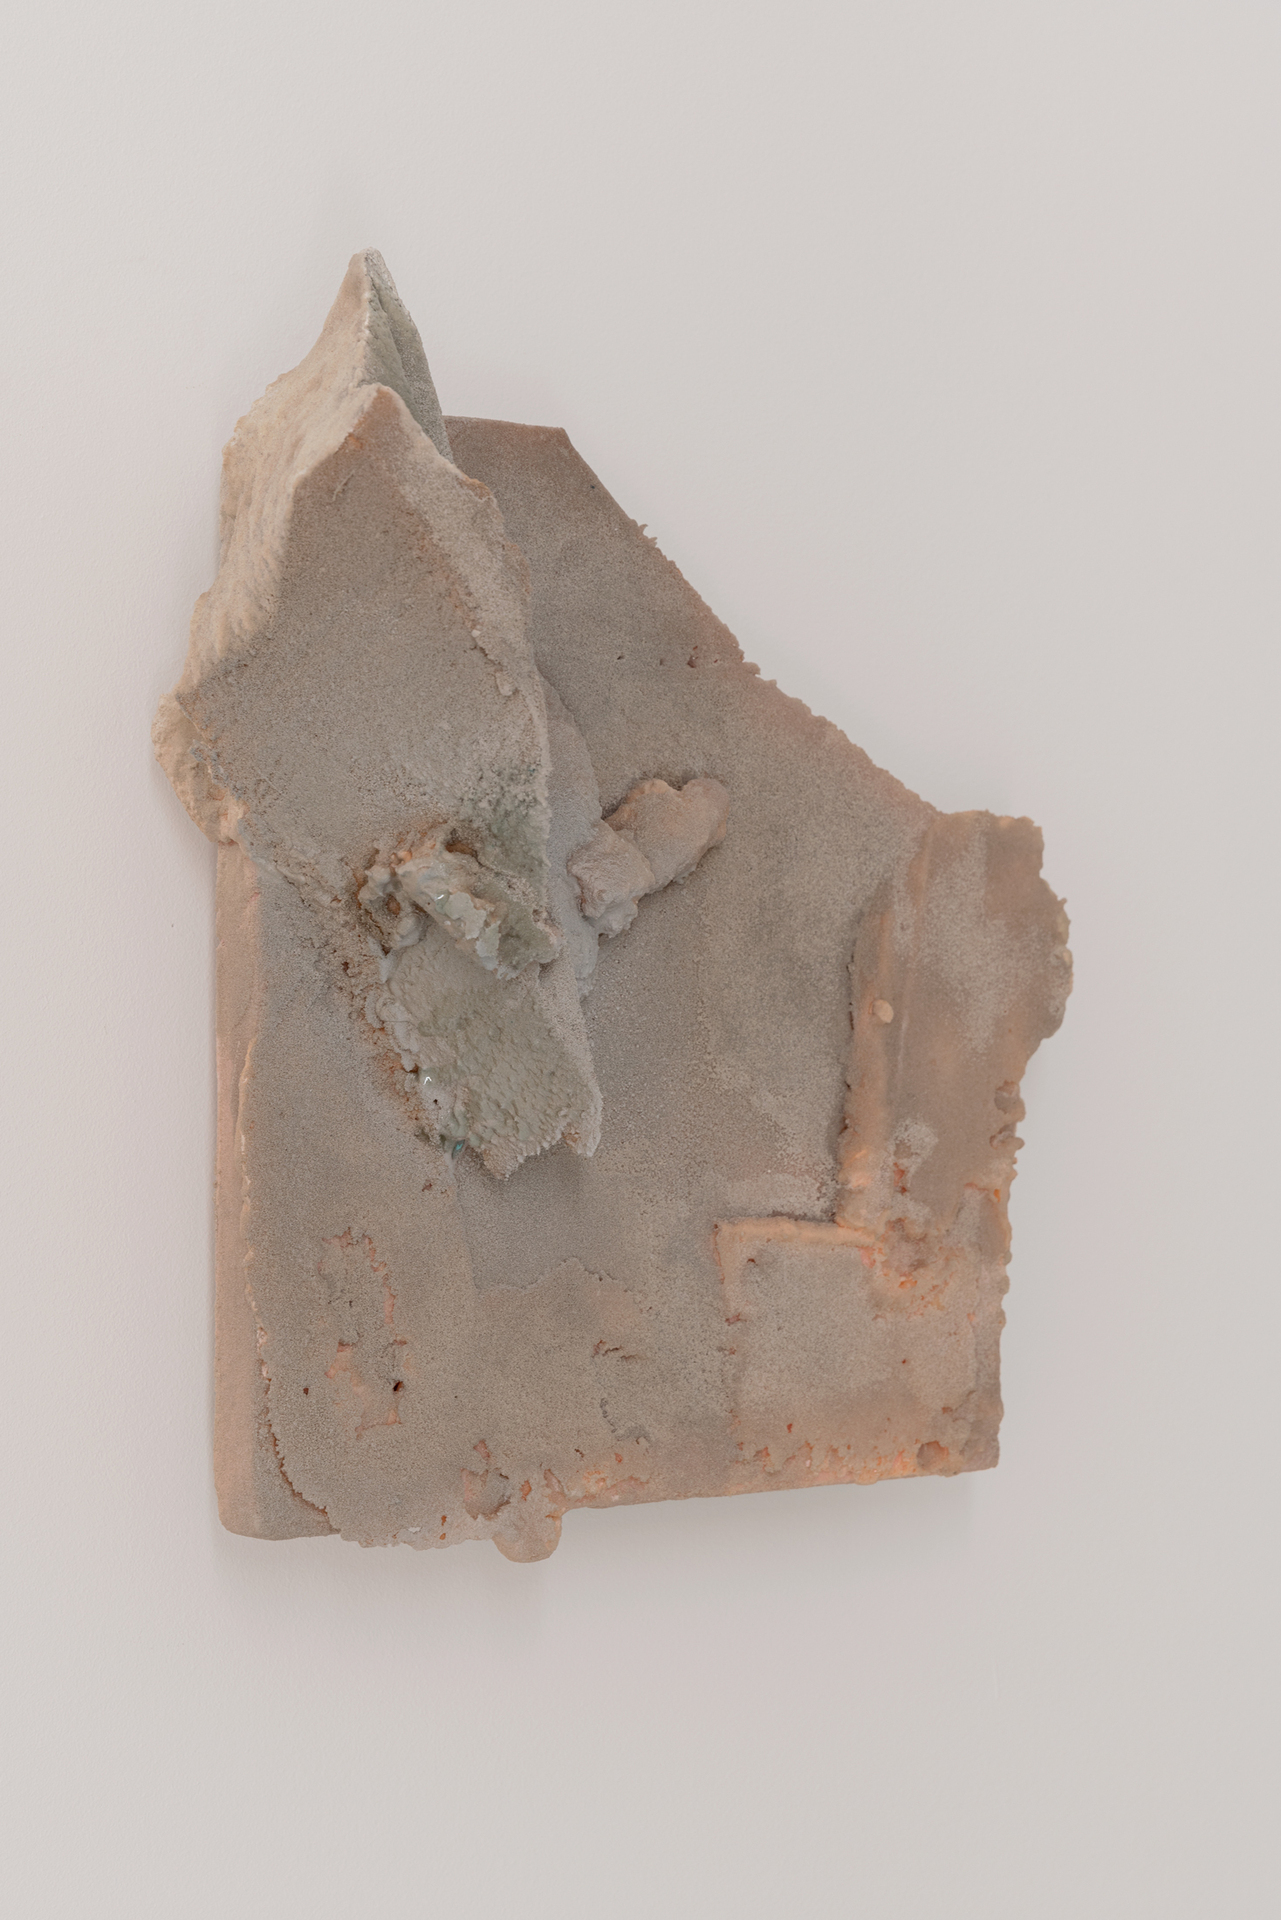 Susi Gelb - Chemical / Mineral Evidence 5, 2020, sand, epoxy resin, aryl, pigments, 43x34x15 cm